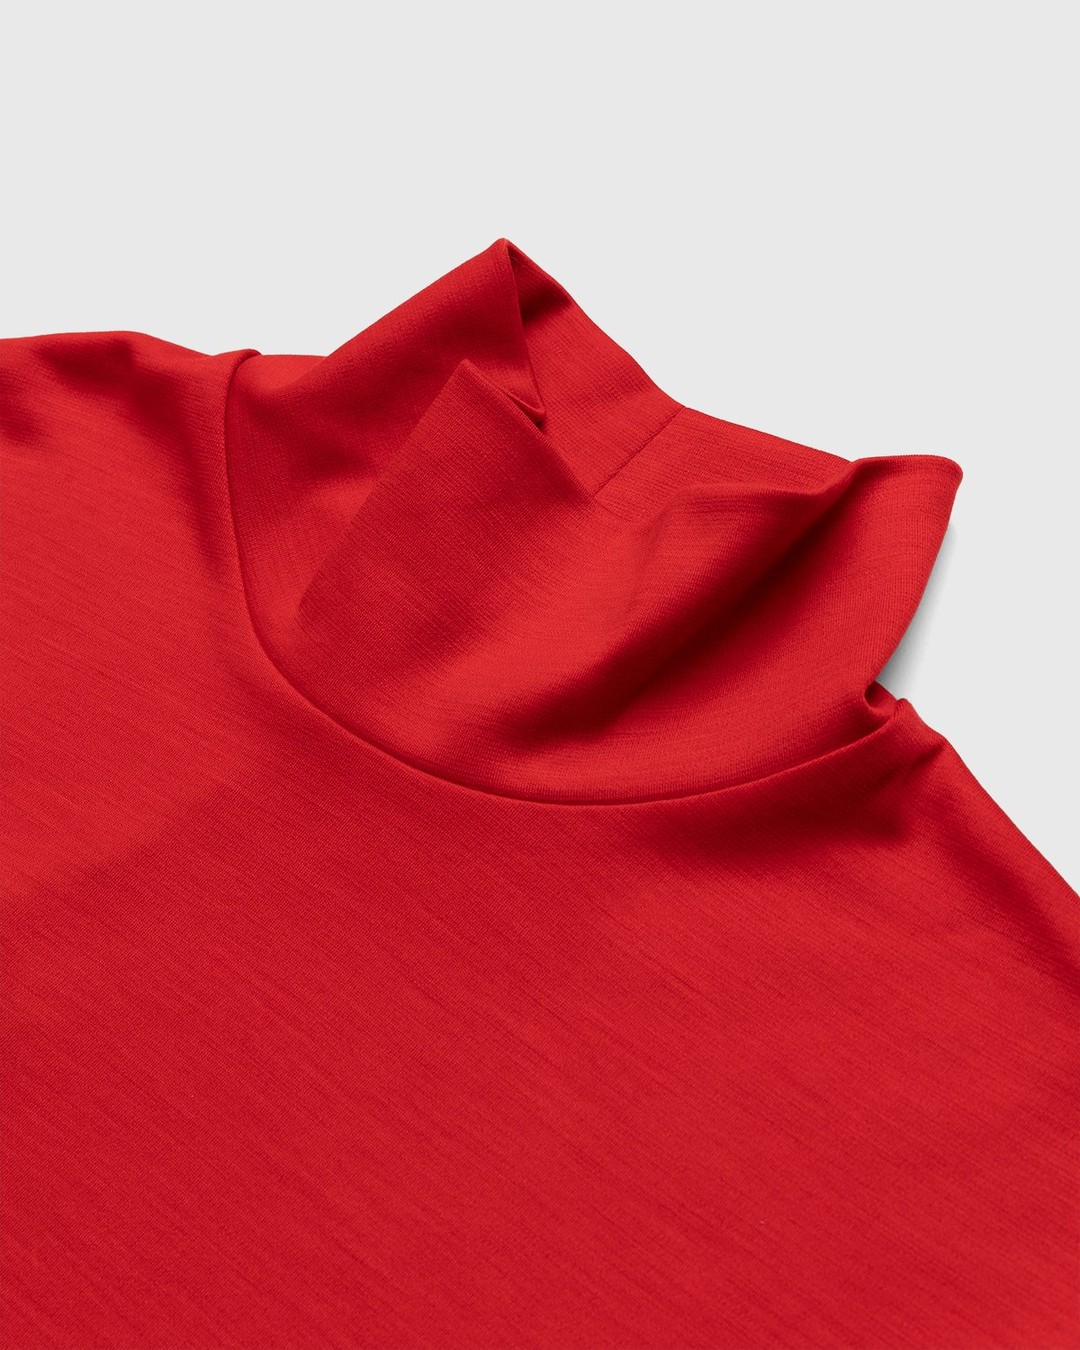 Phipps – Turtleneck Flame - Knitwear - Red - Image 3